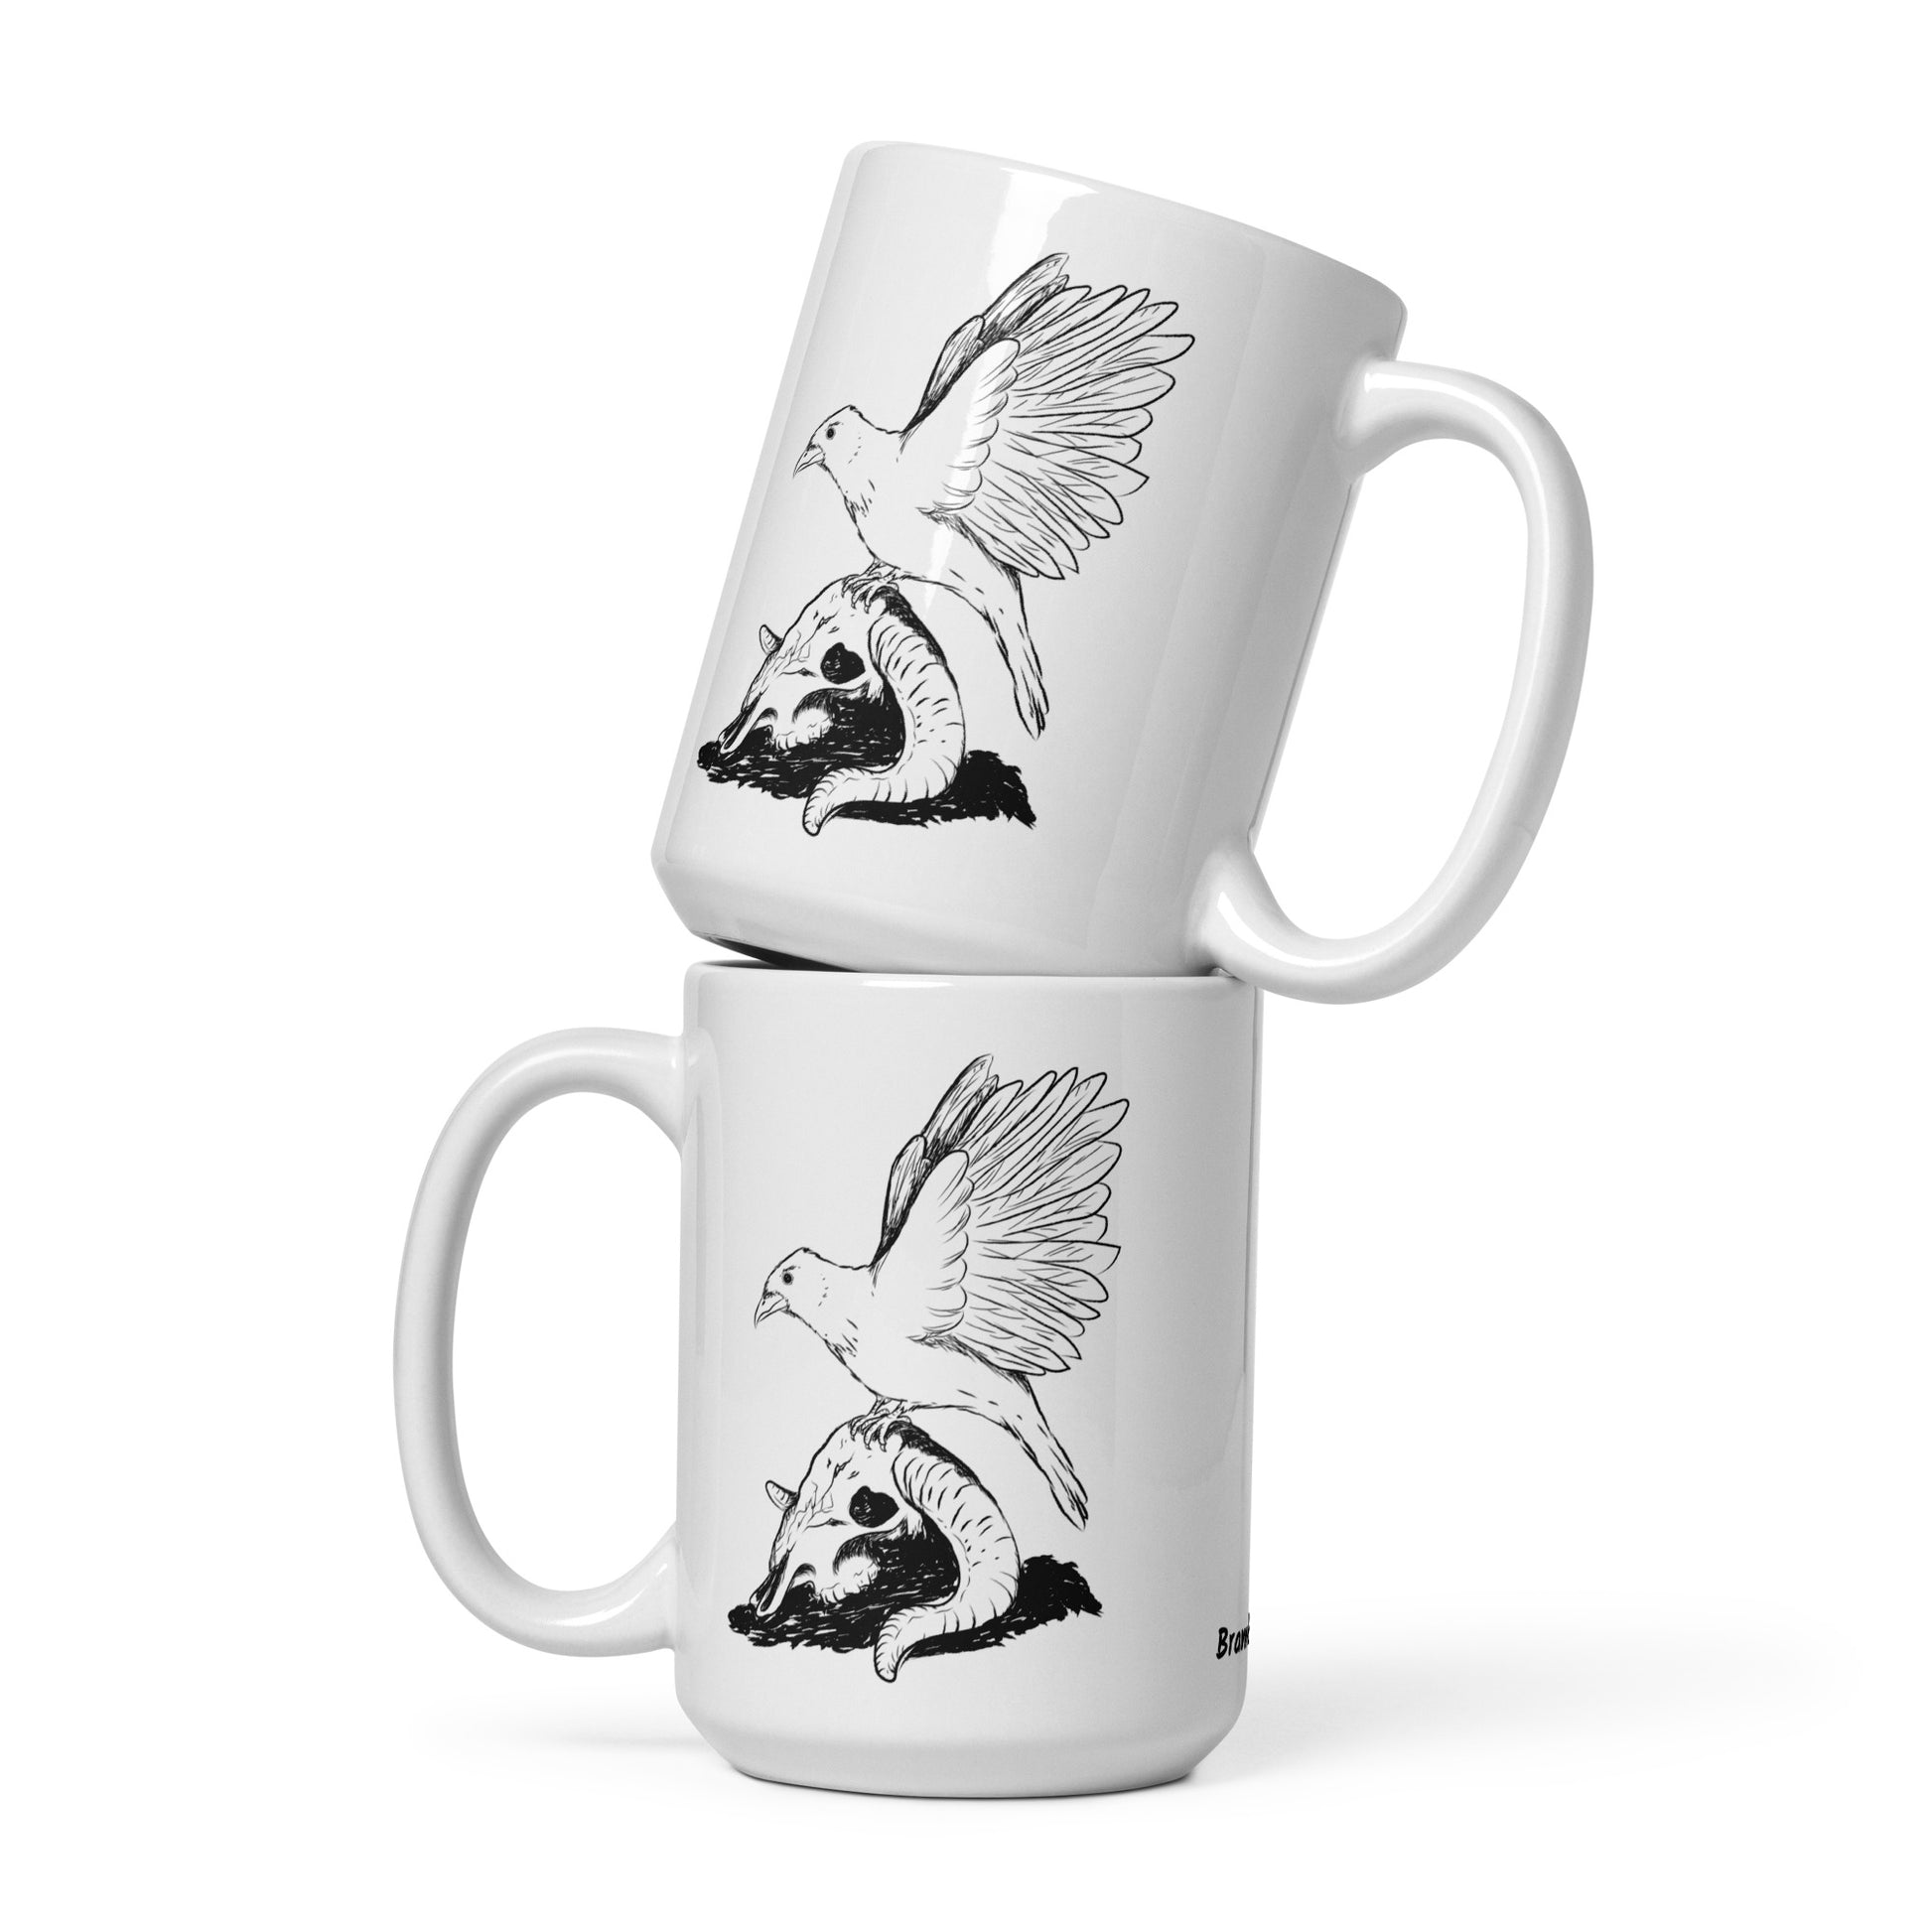 15 ounce white glossy mug featuring double sided print of Reflections, a design with a crow with wings outstretched on a sheep skull. Two mugs shown stacked on each other.